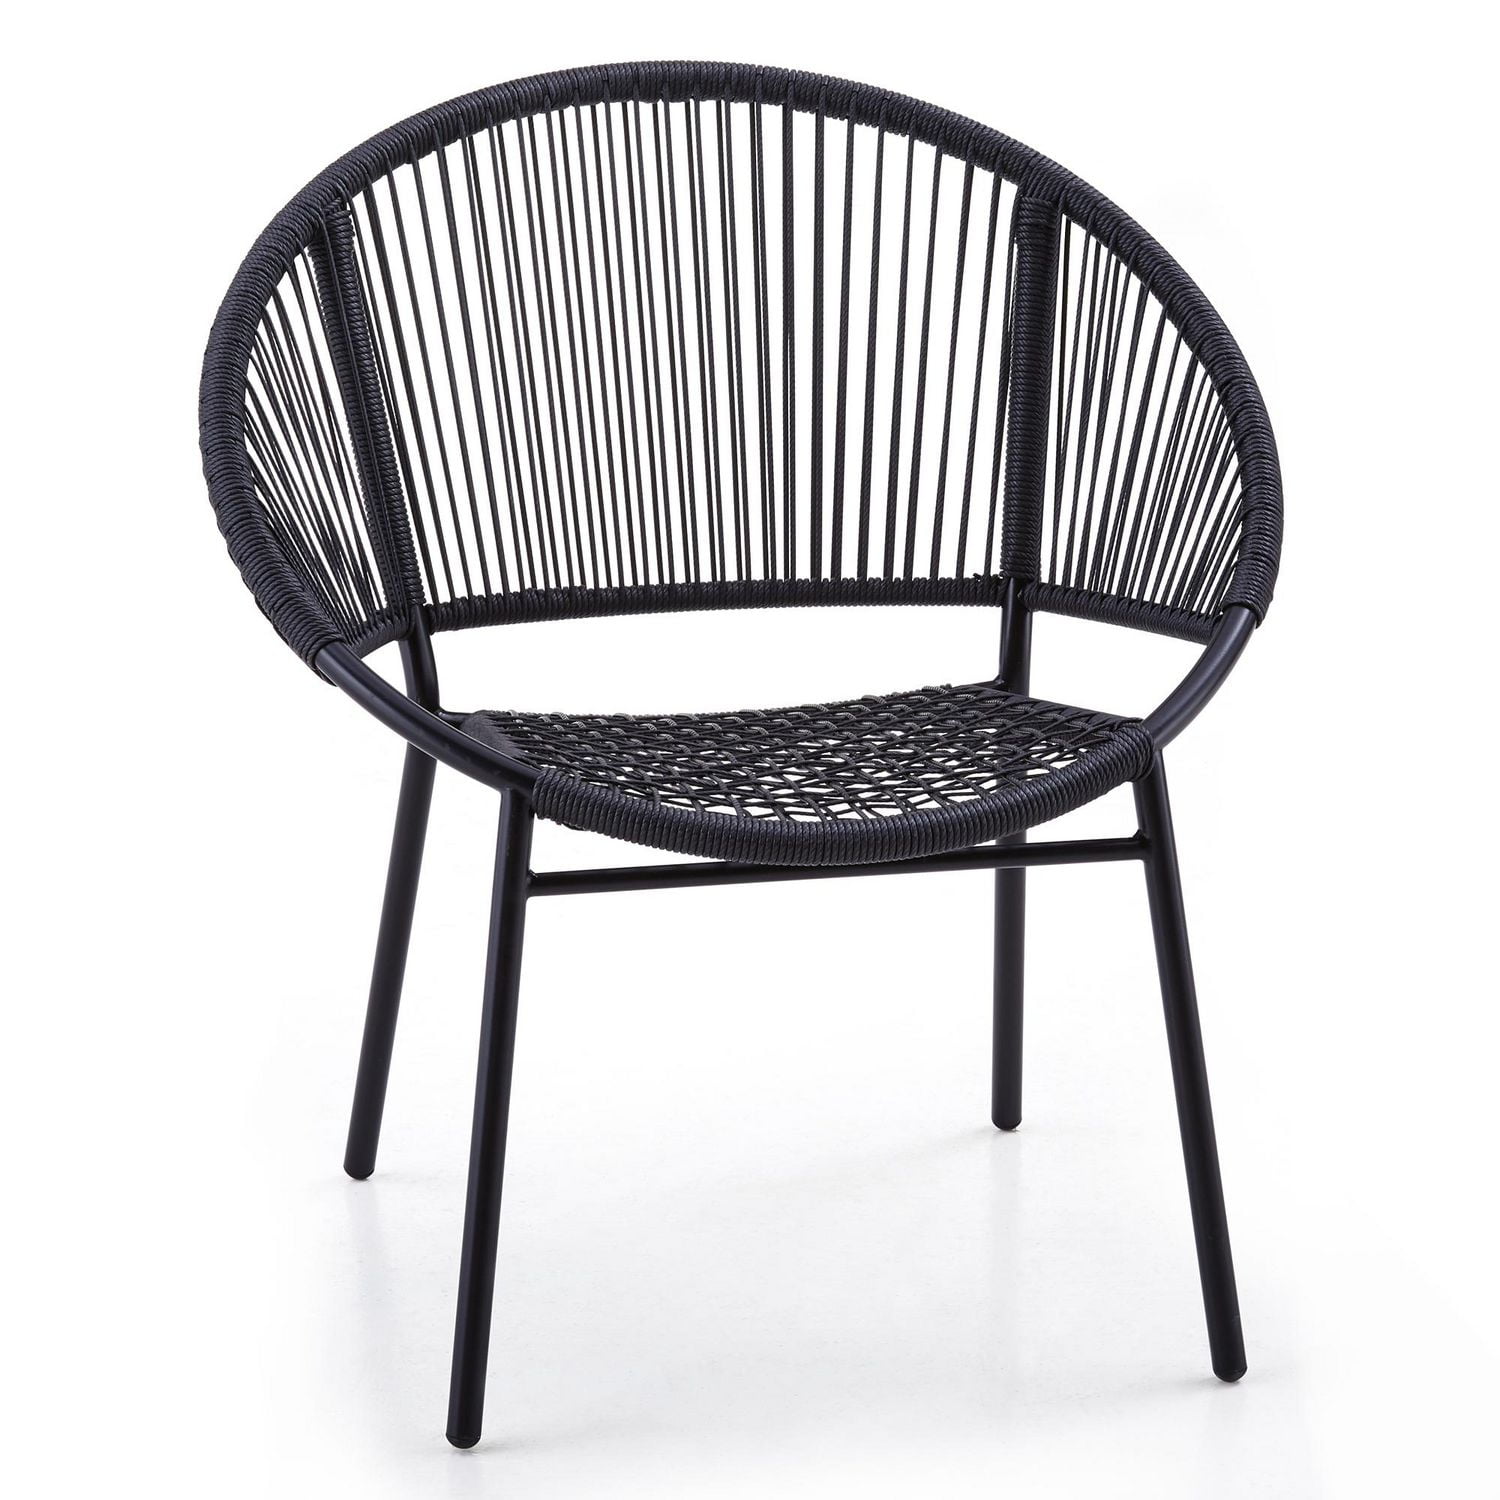 Mainstays Rope Wicker Stacking Chair 